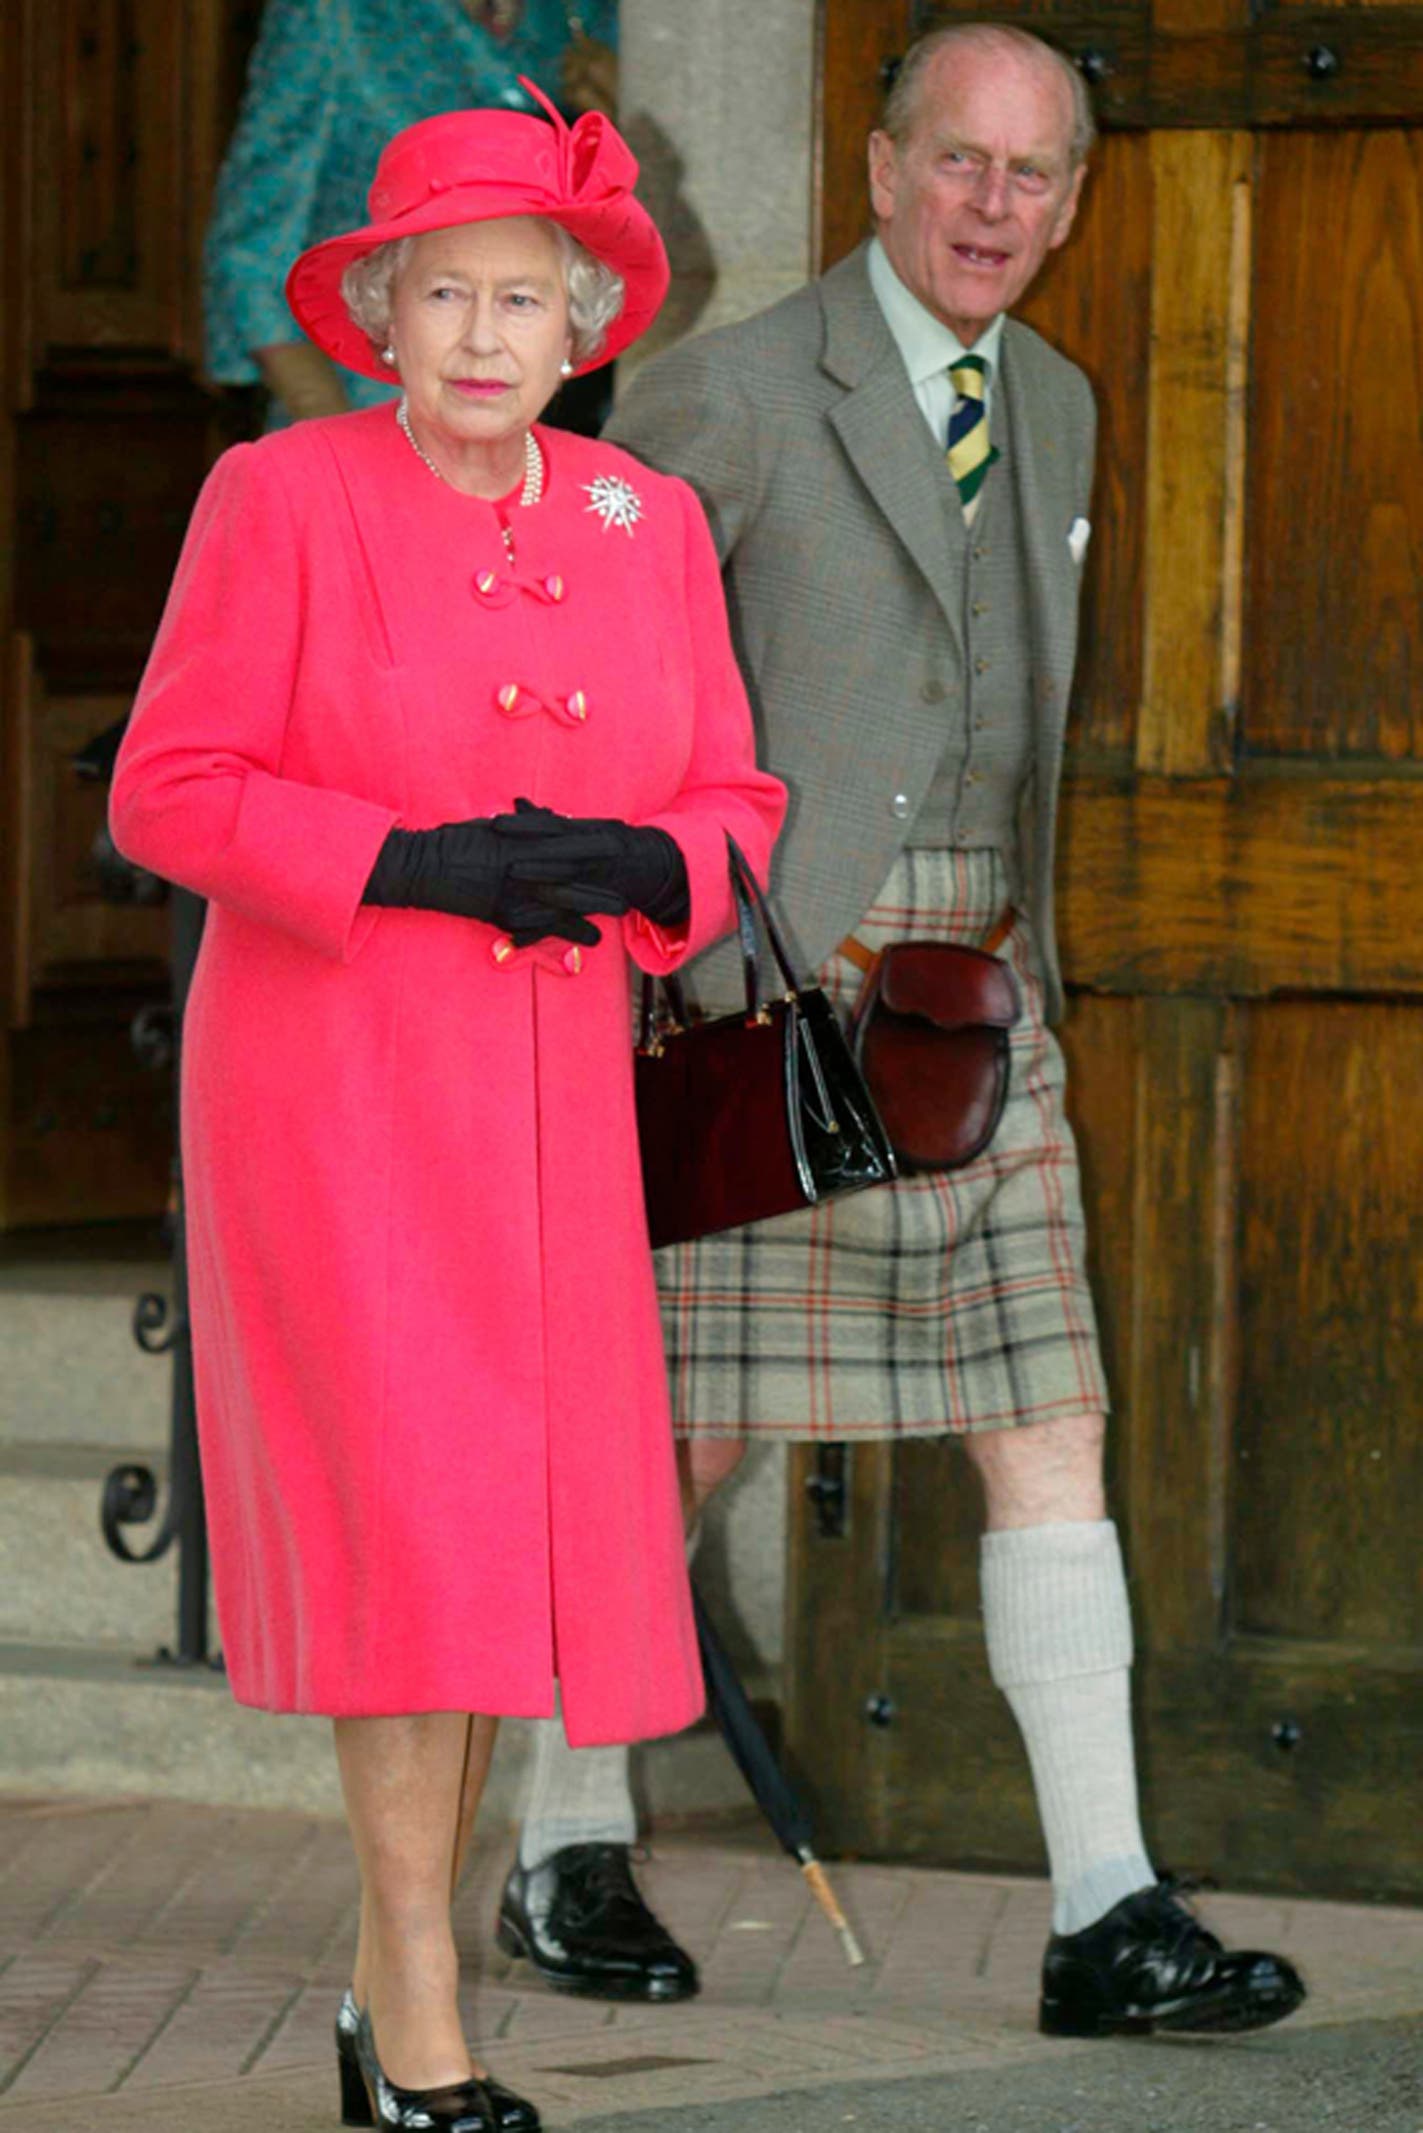 In Scotland, Queen Elizabeth II's husband always wore a kilt to formal occasions.  Image credit: Getty Images